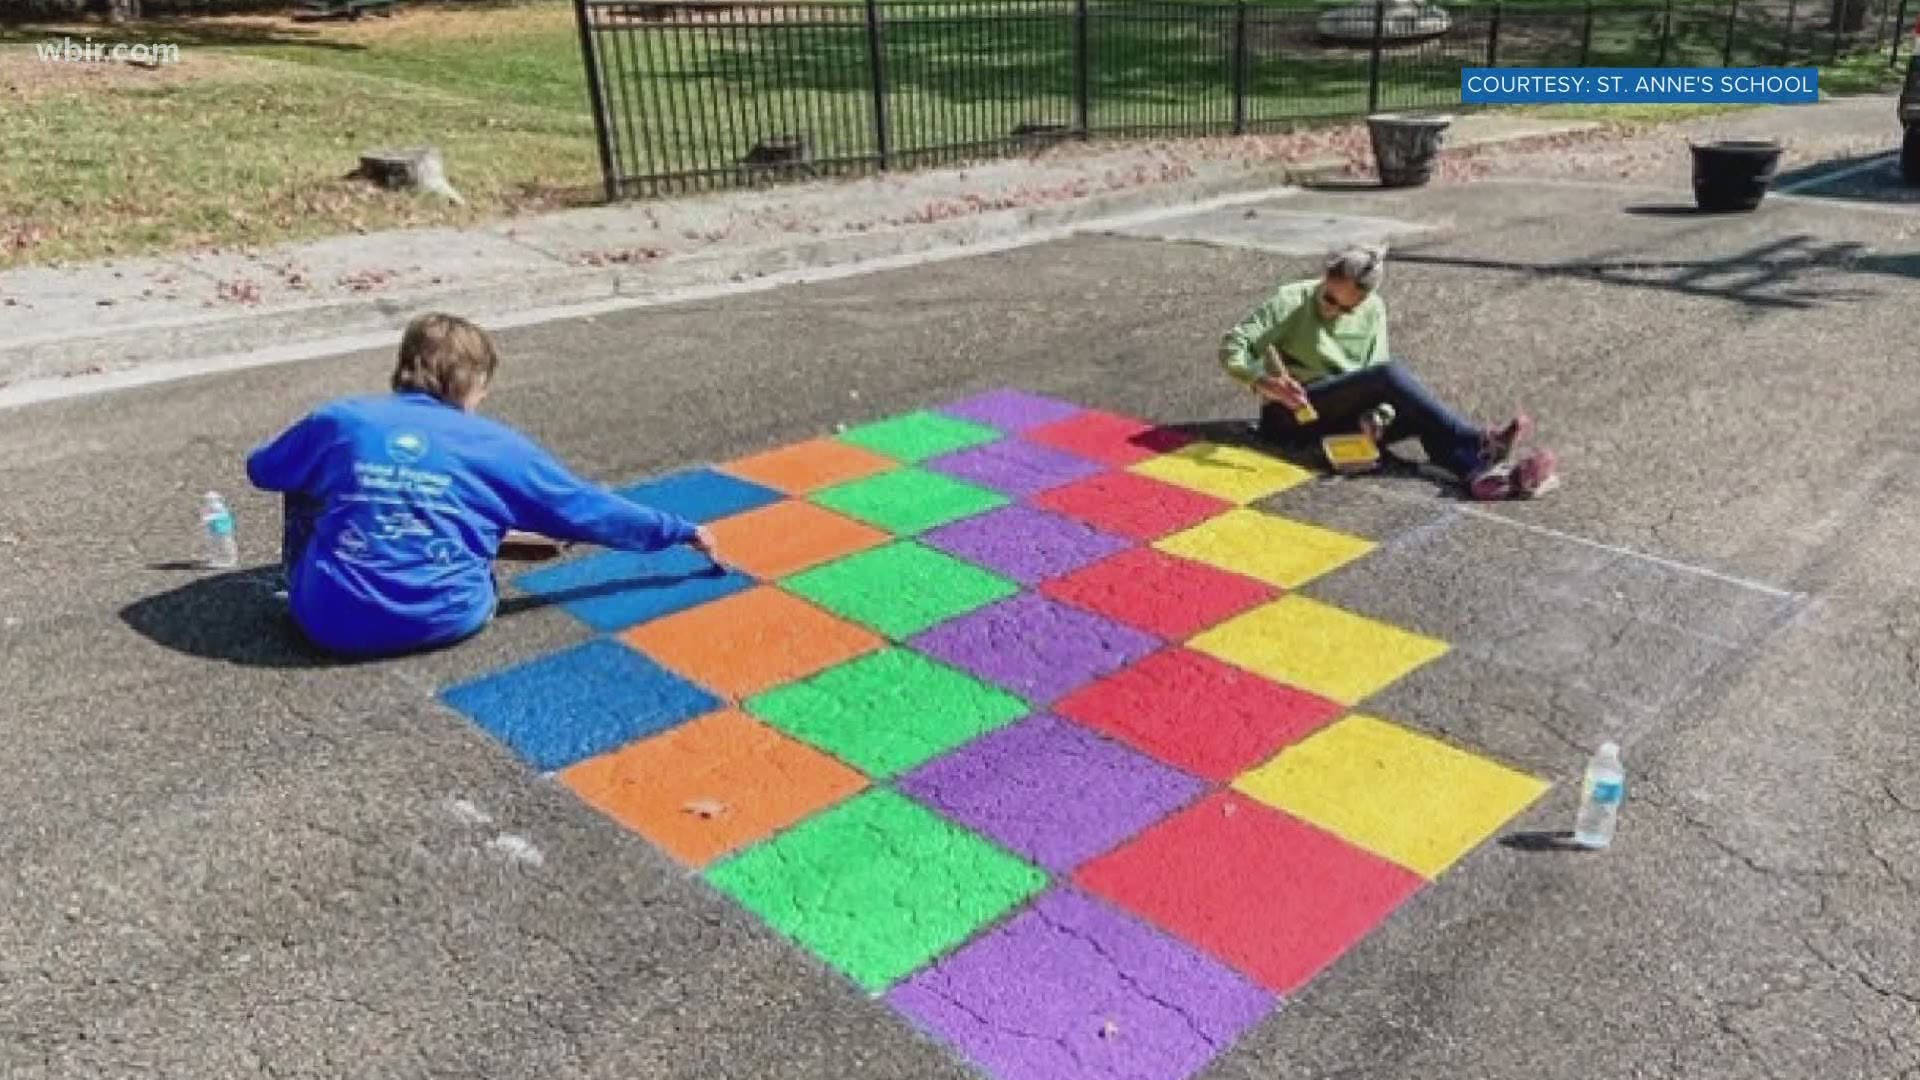 There are all kinds of designs on the asphalt from a big dragon to a colorful hopscotch space.